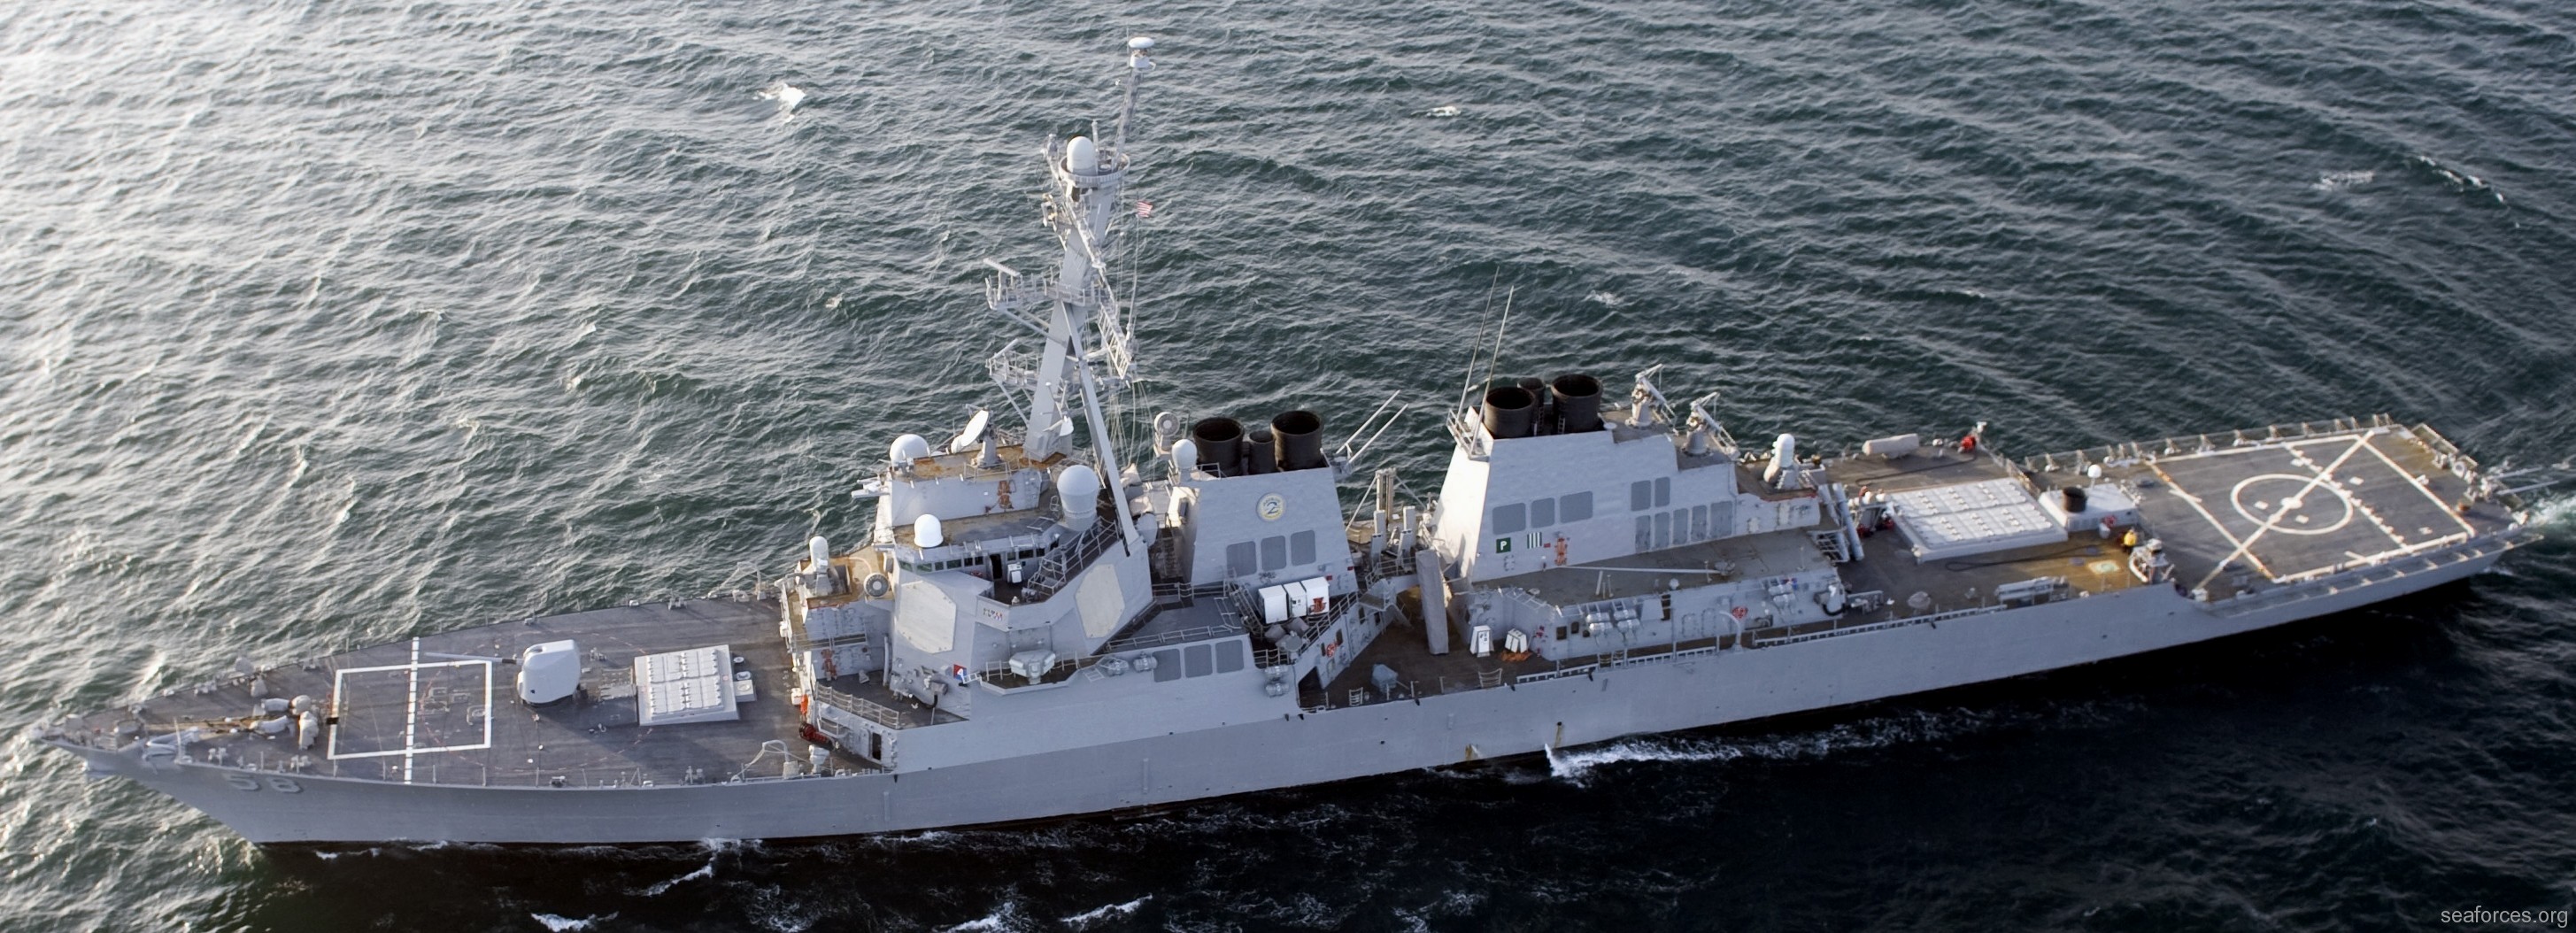 ddg-58 uss laboon guided missile destroyer us navy 54